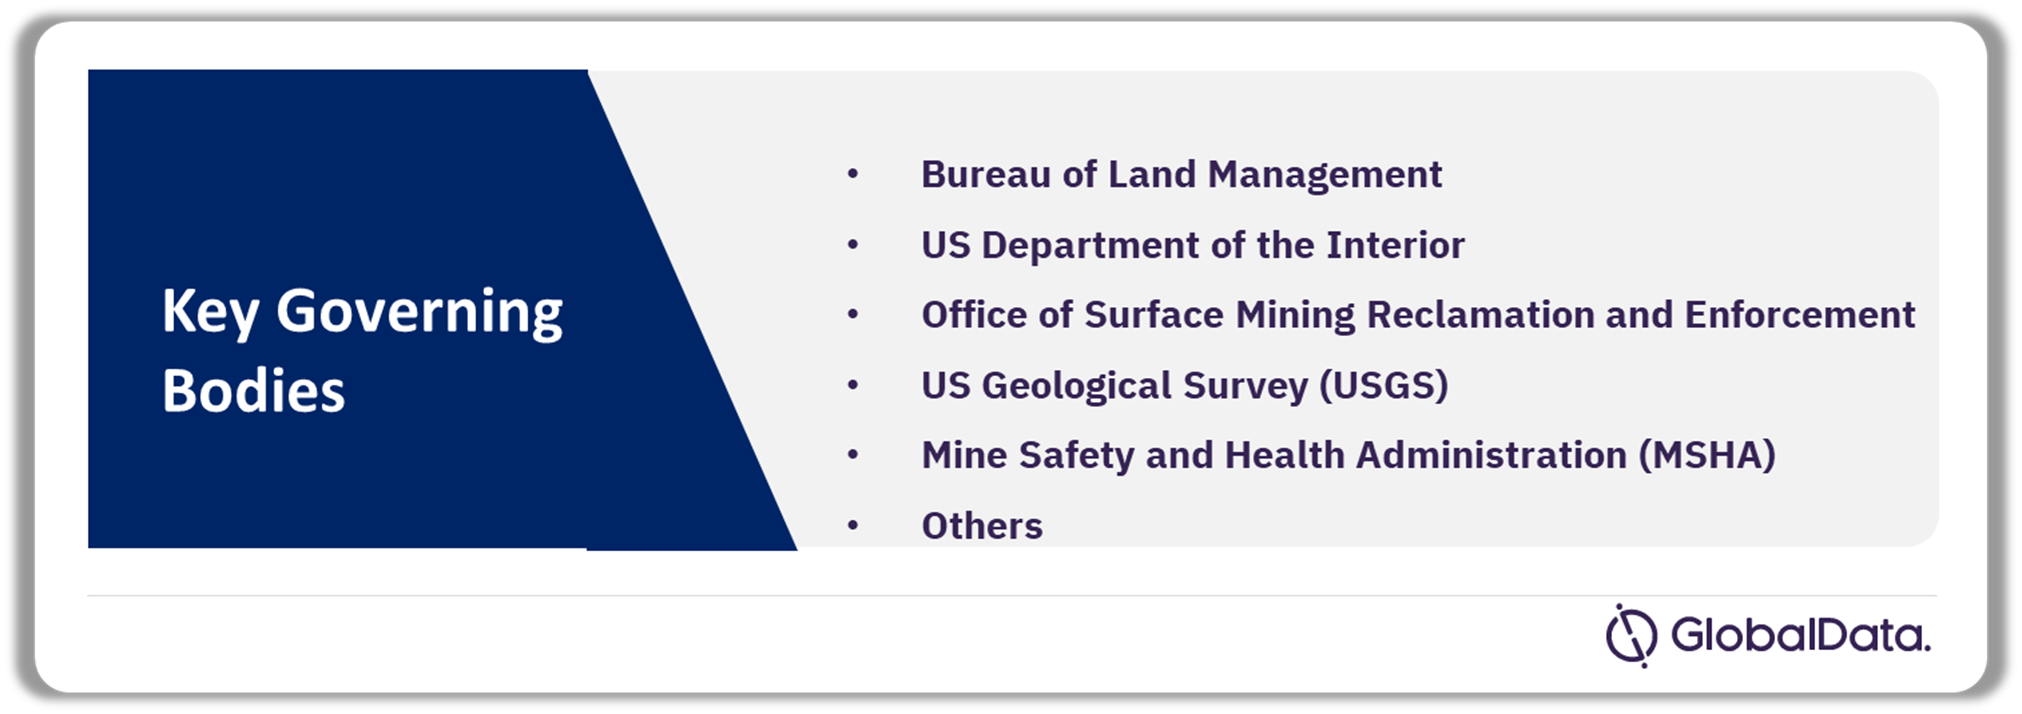 Governing Bodies in US Mining Industry